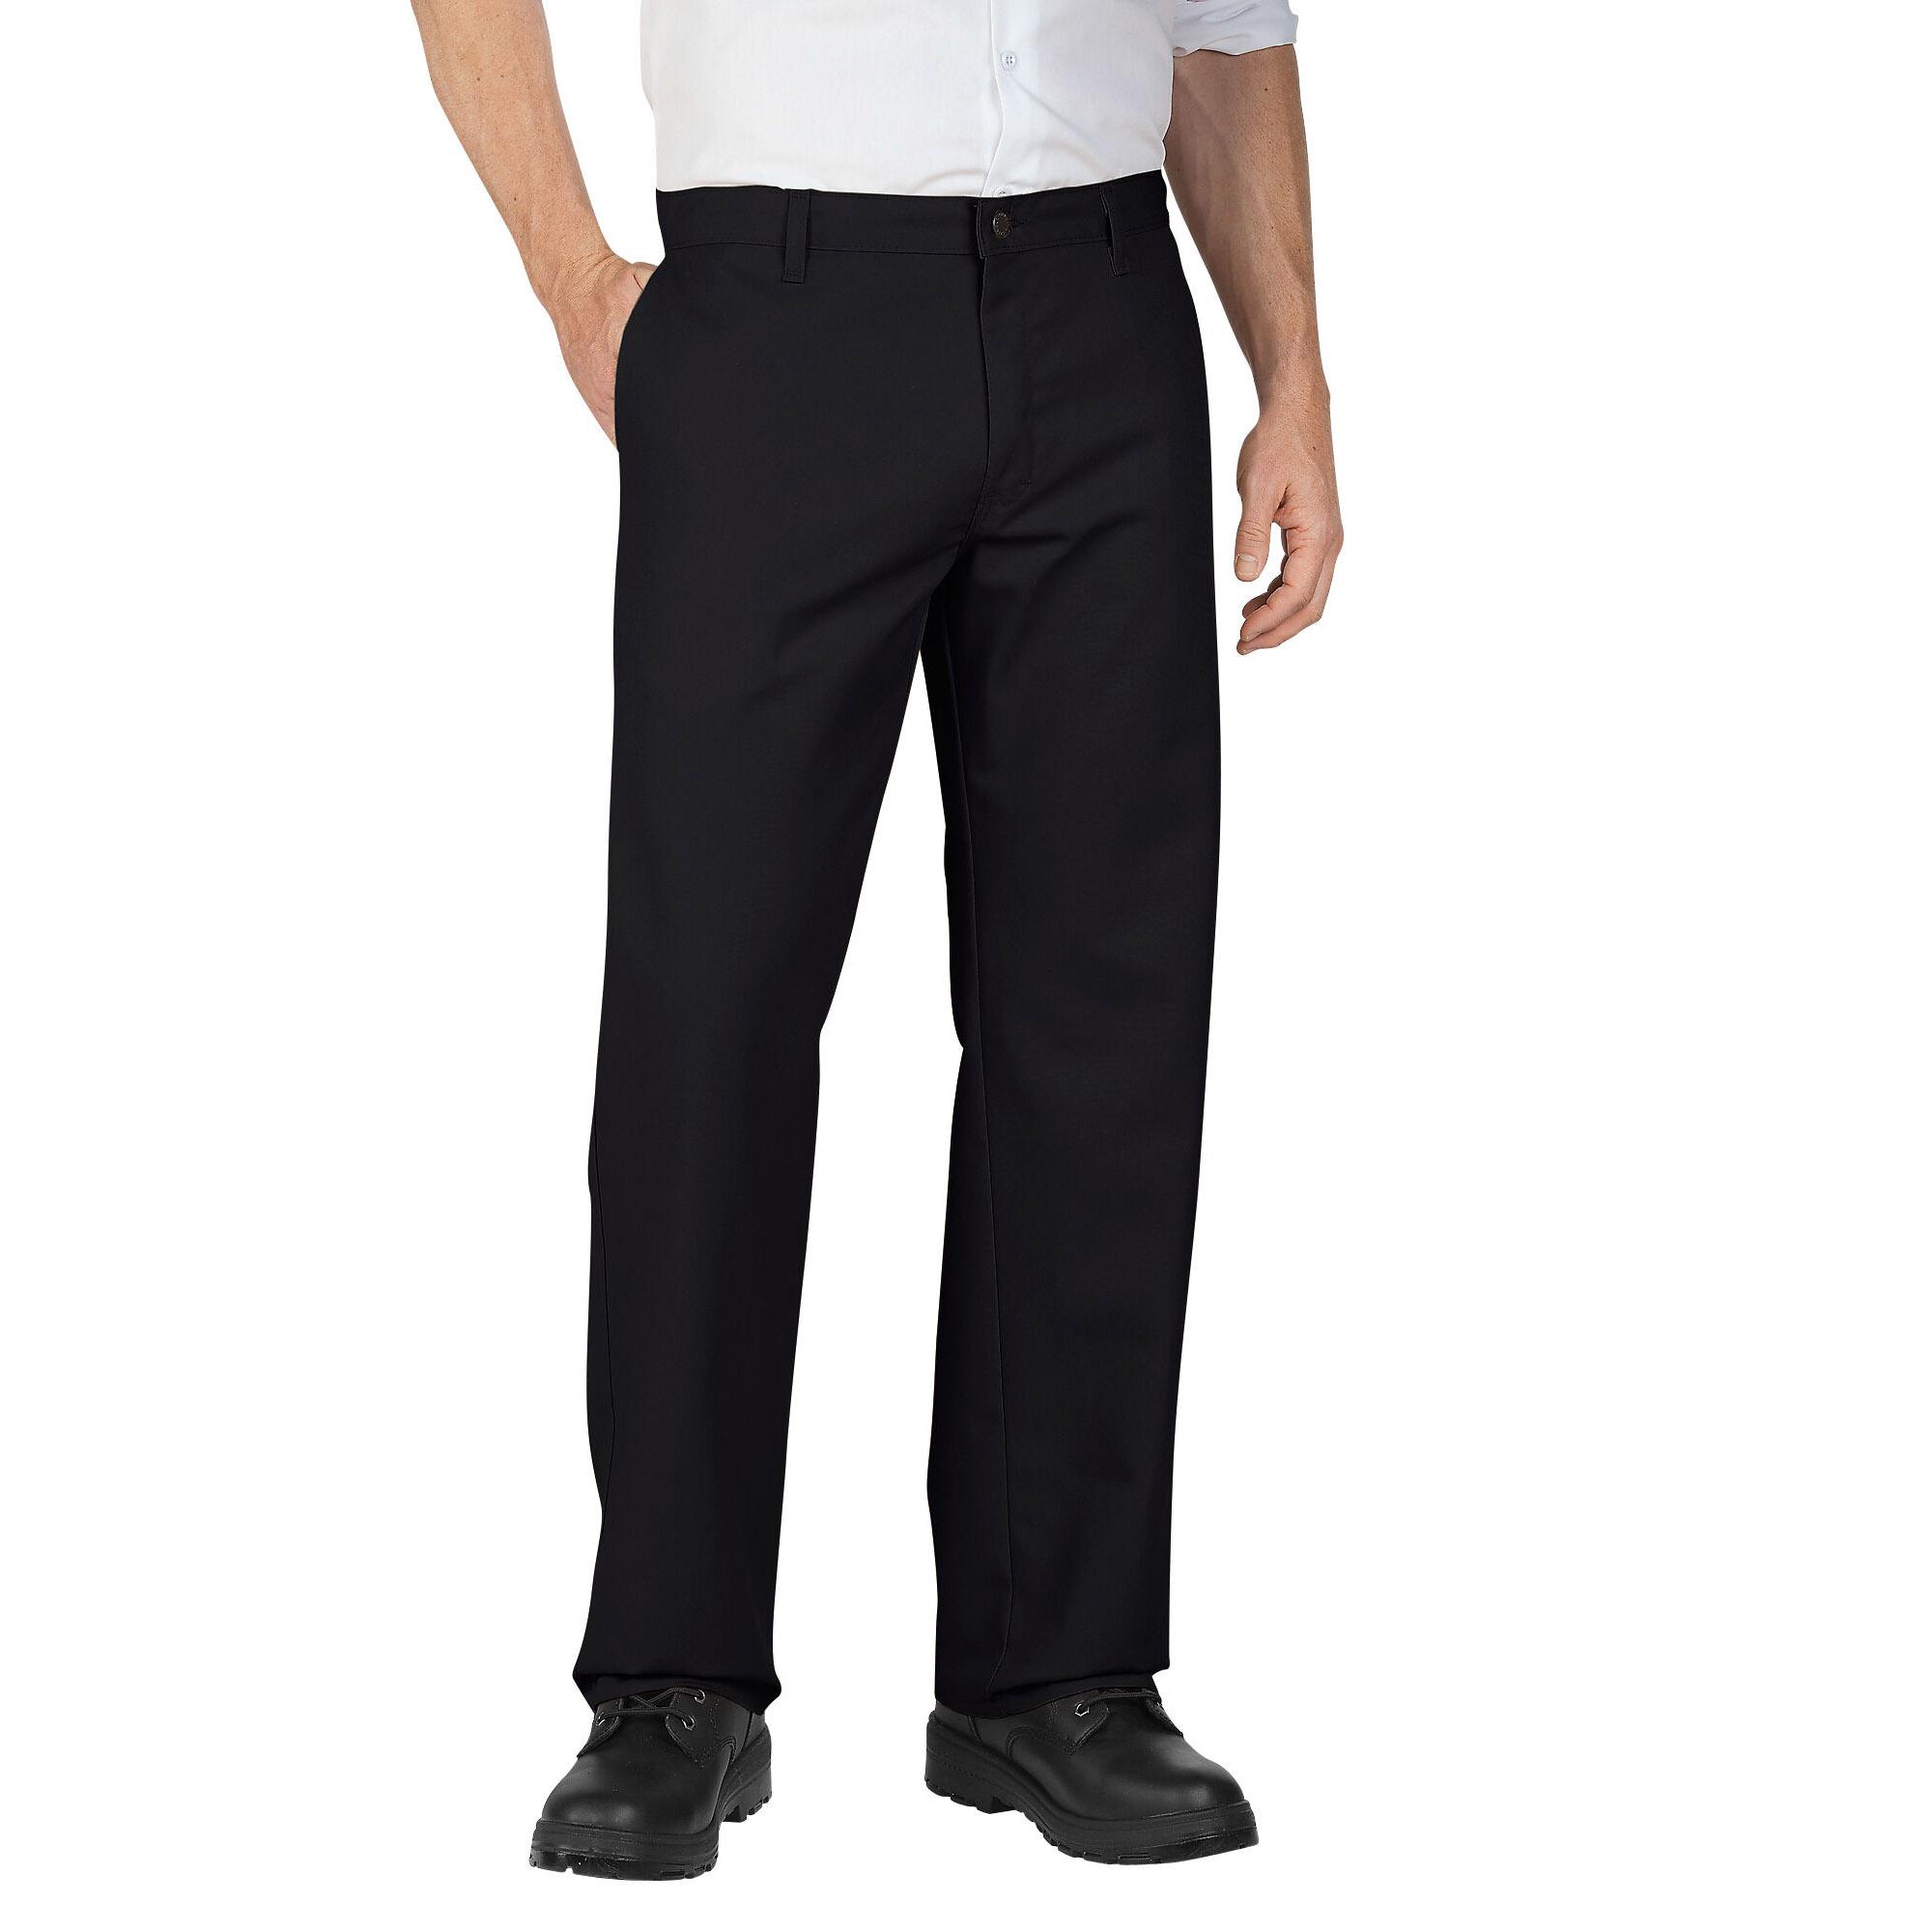 Dickies Mens Relaxed Fit Straight Leg Flat Front Flex Pants for $11 Shipped